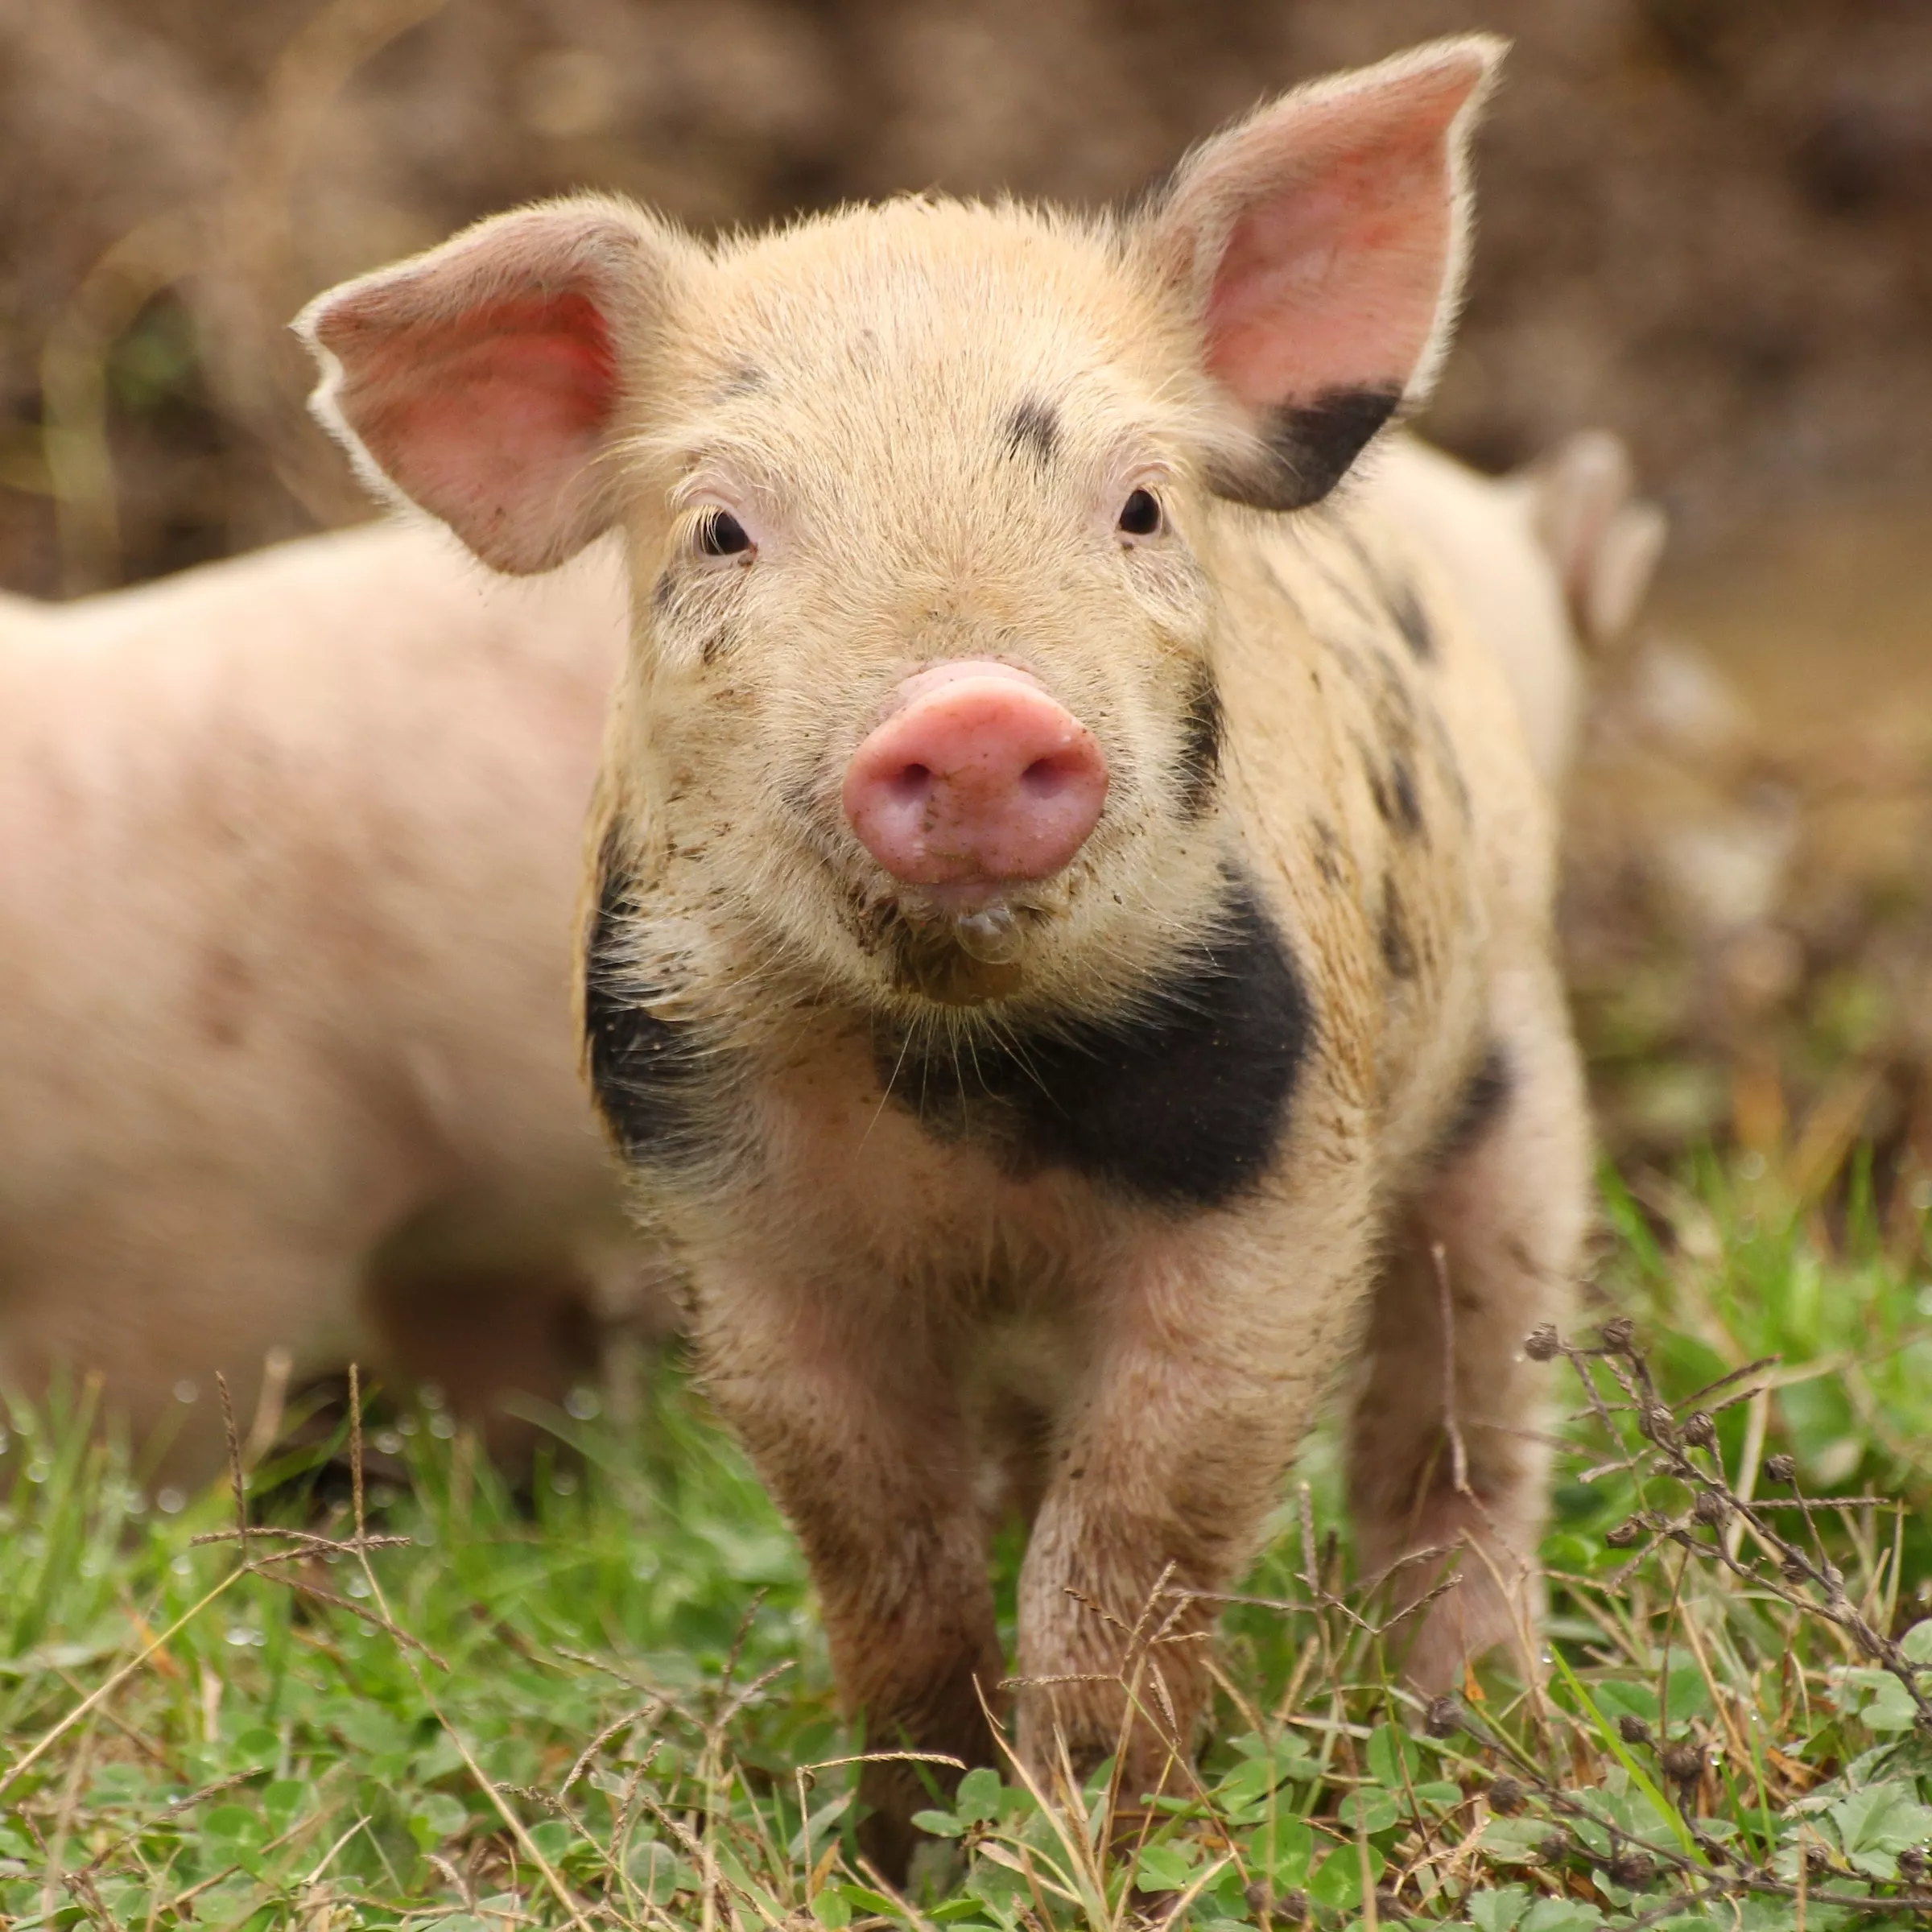 Spare animals like this pig by eating plant-based